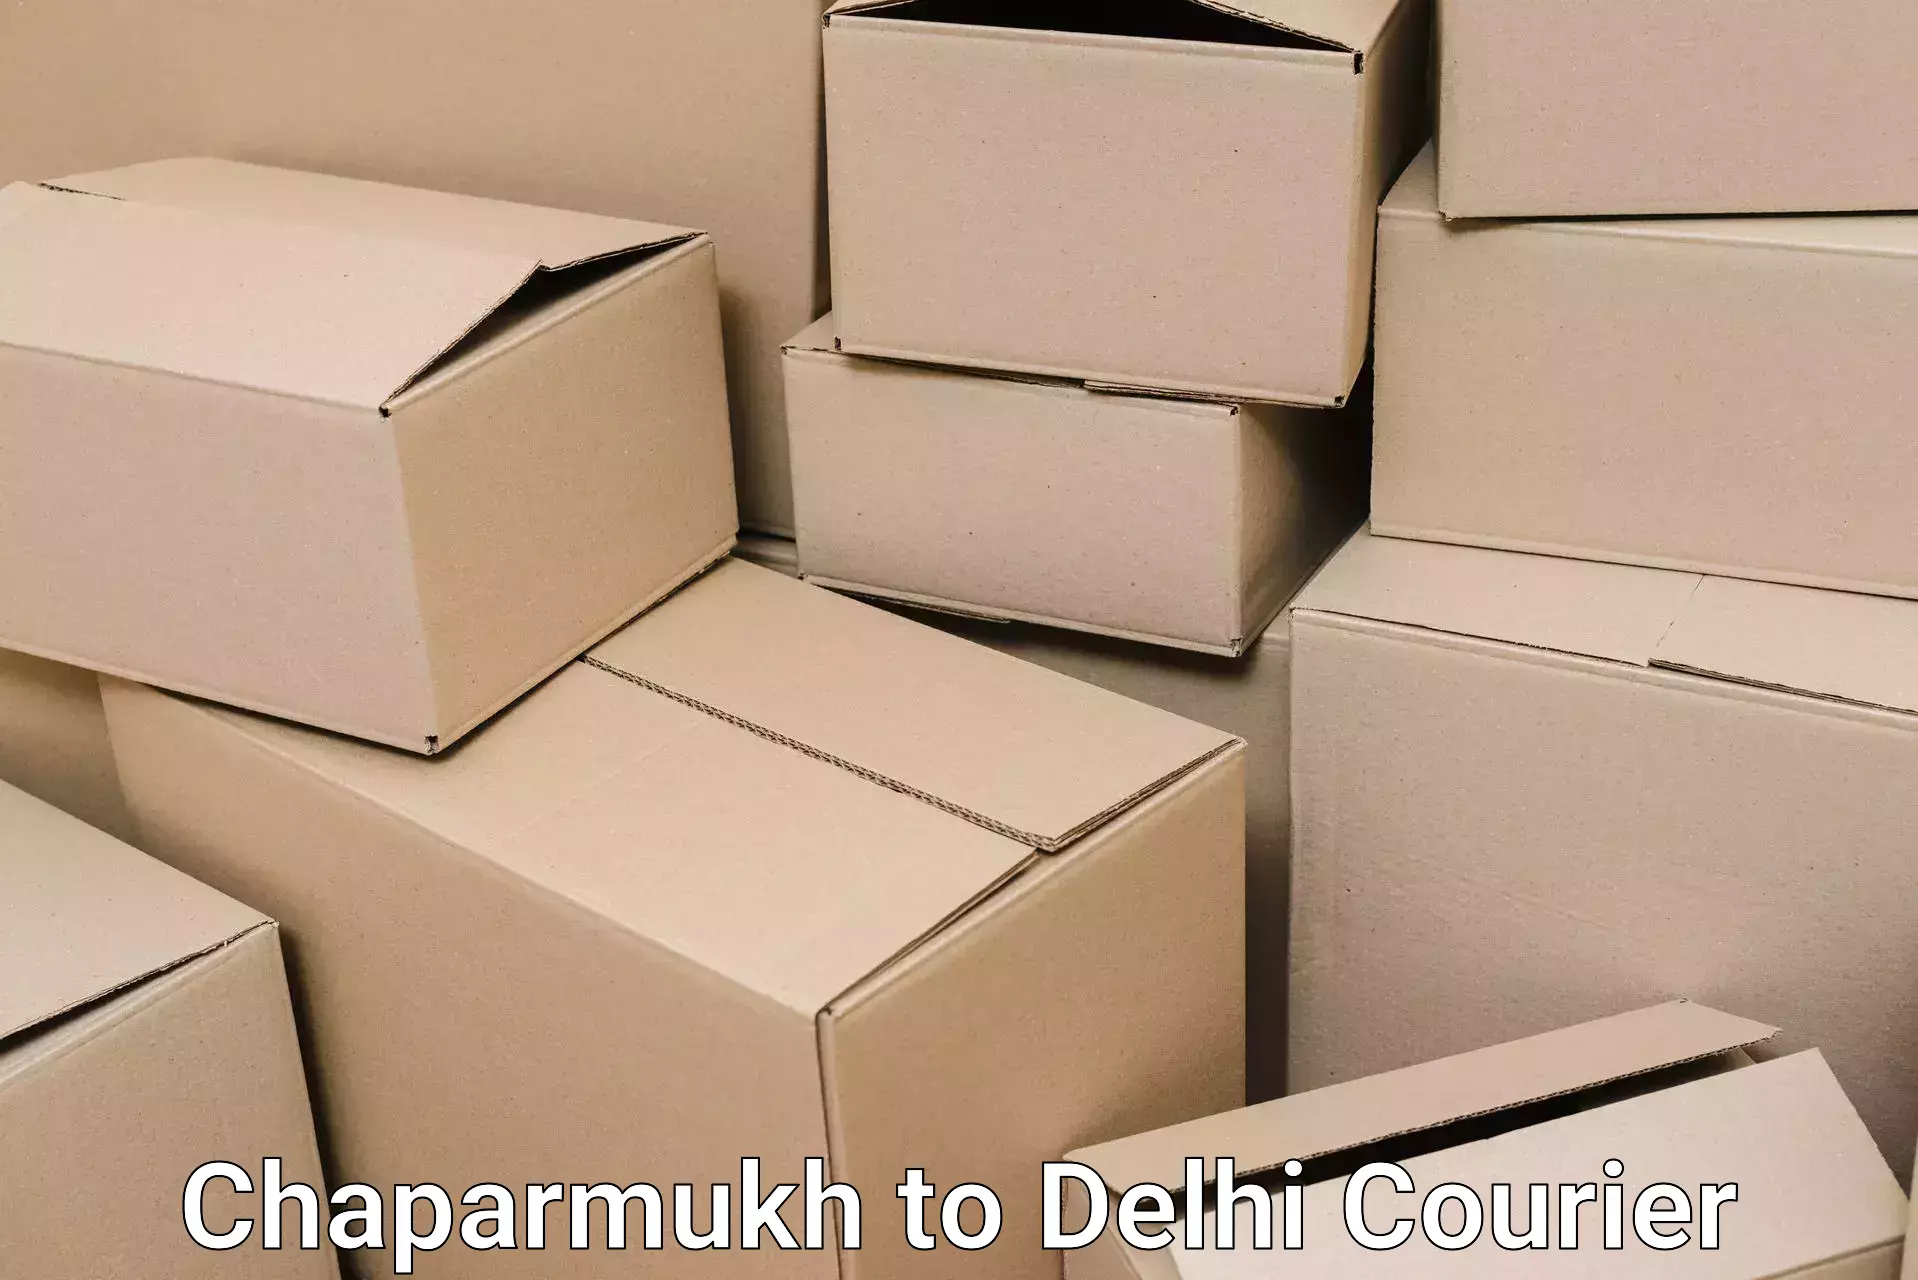 Professional packing services Chaparmukh to Delhi